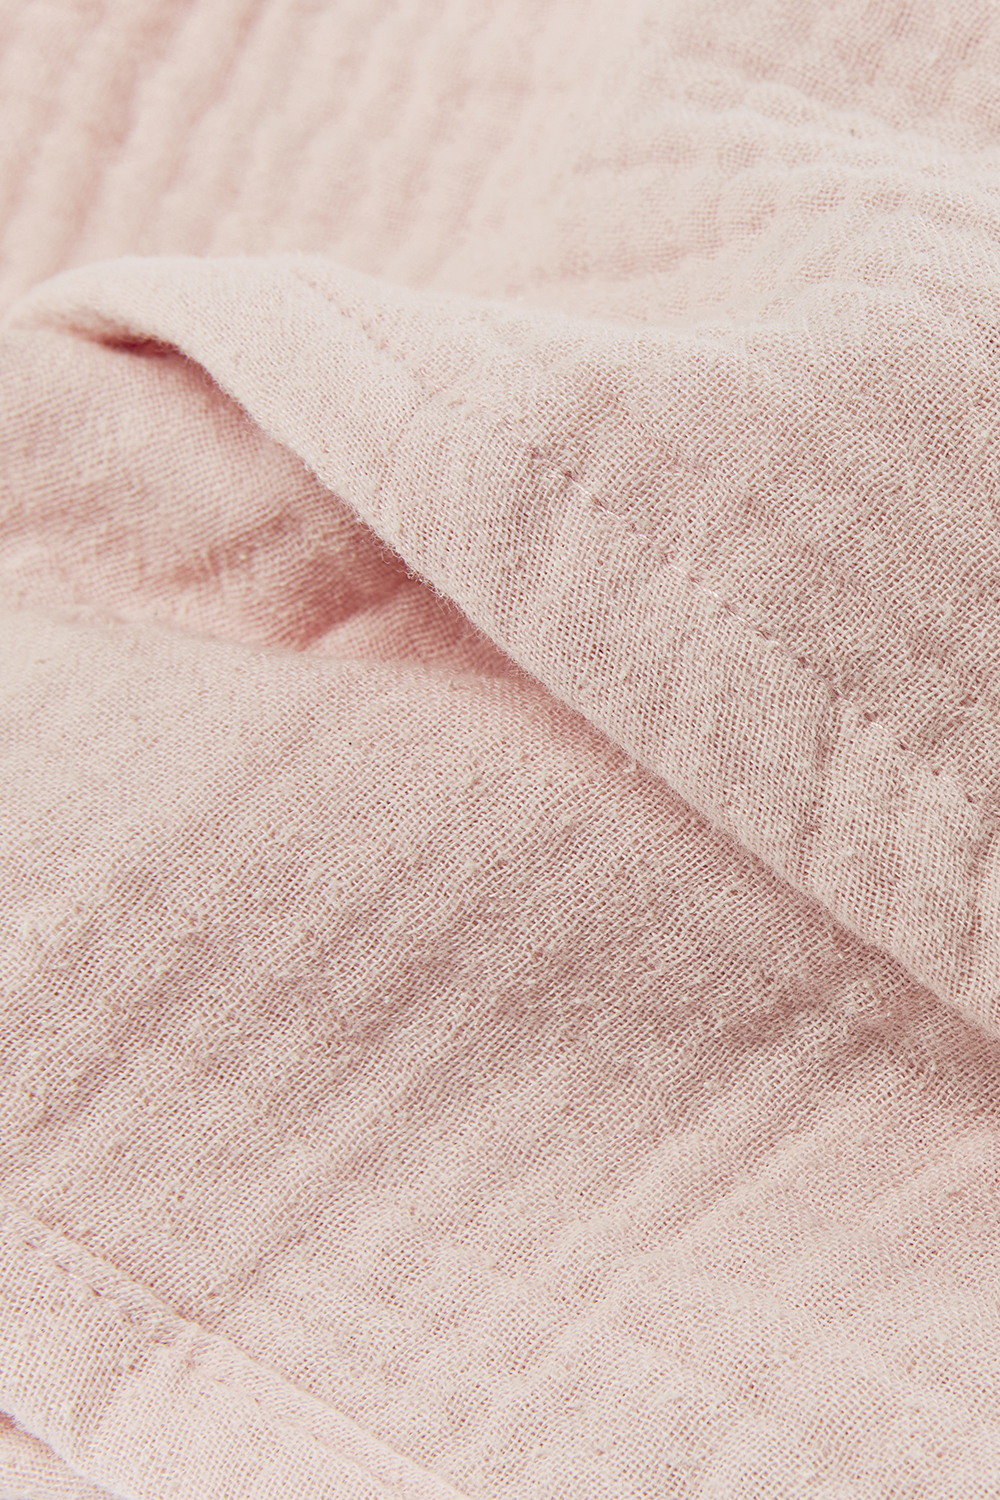 Cot bed sheet pre-washed muslin Uni - soft pink - 100x150cm